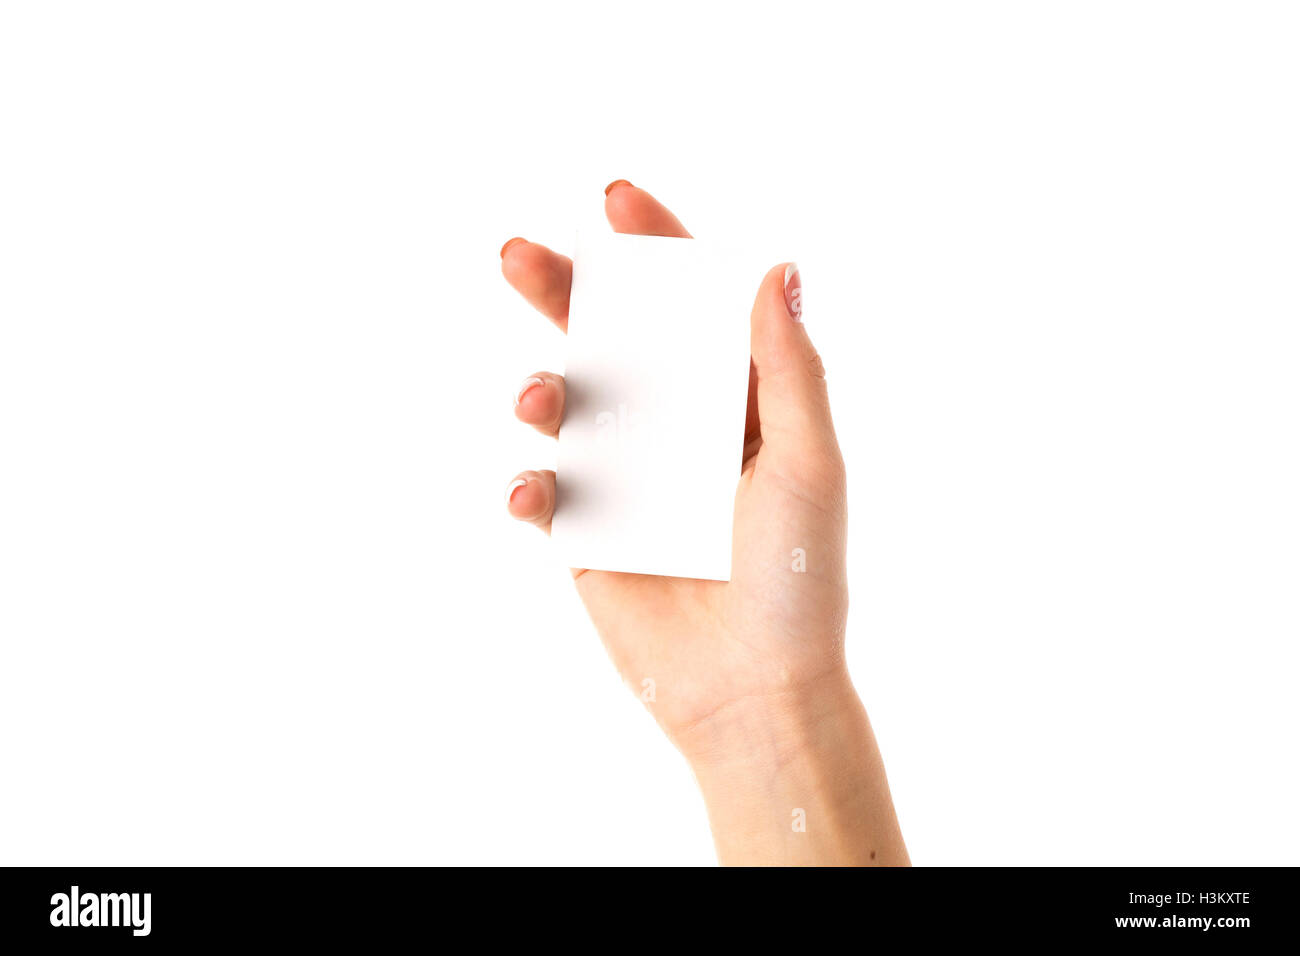 Woman's hand holding white card Banque D'Images